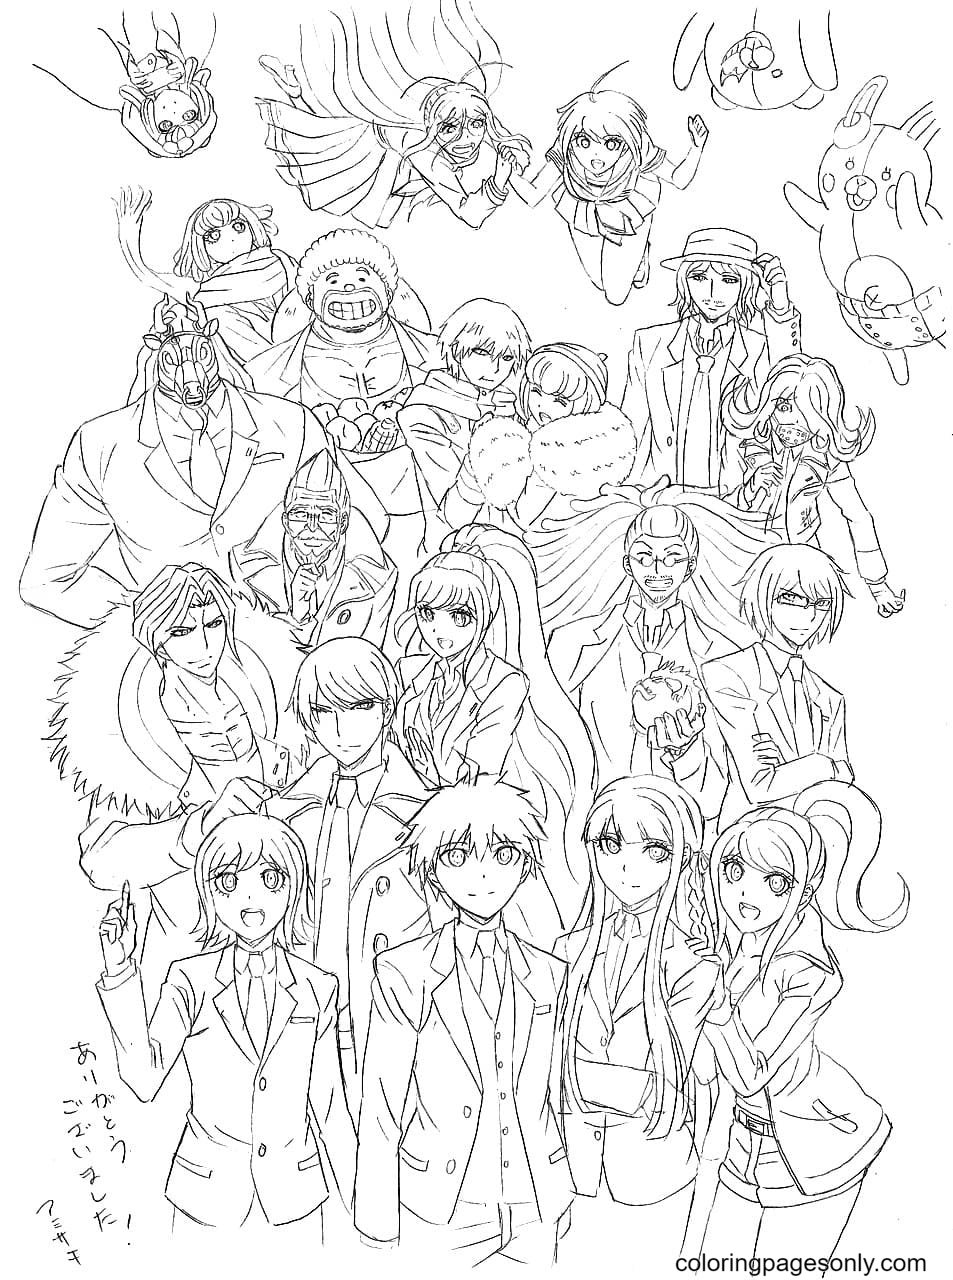 Characters from the anime Danganronpa Coloring Page